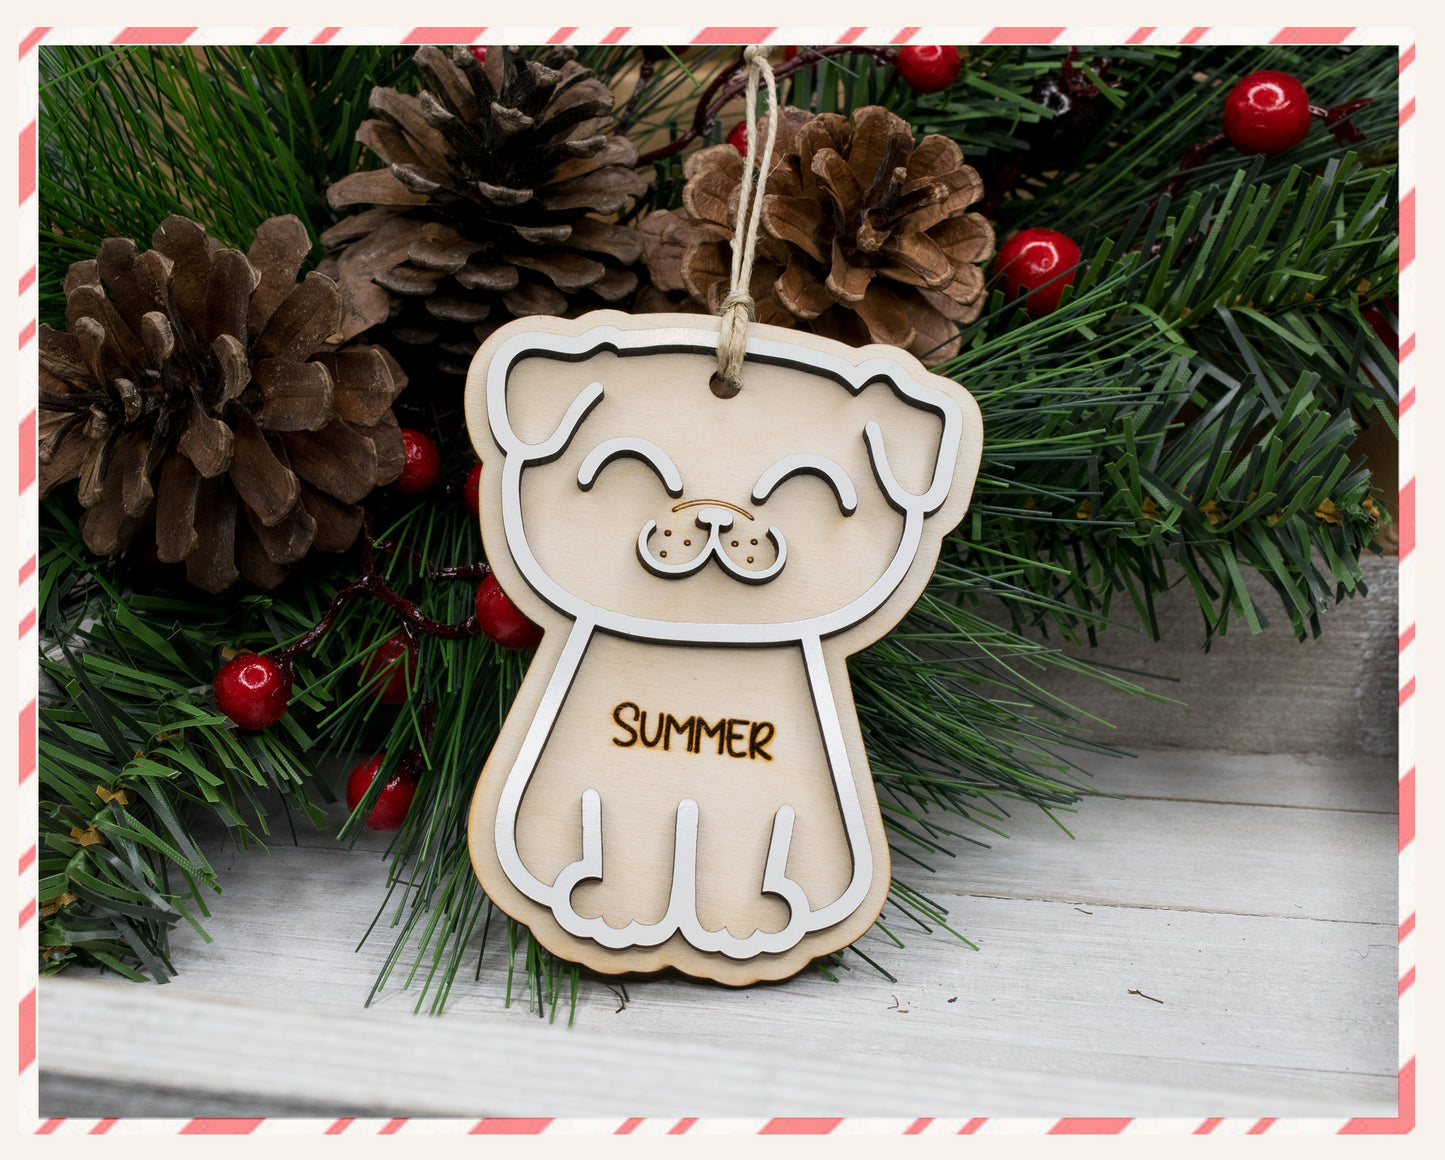 3D Christmas Dog Ornament Personalized